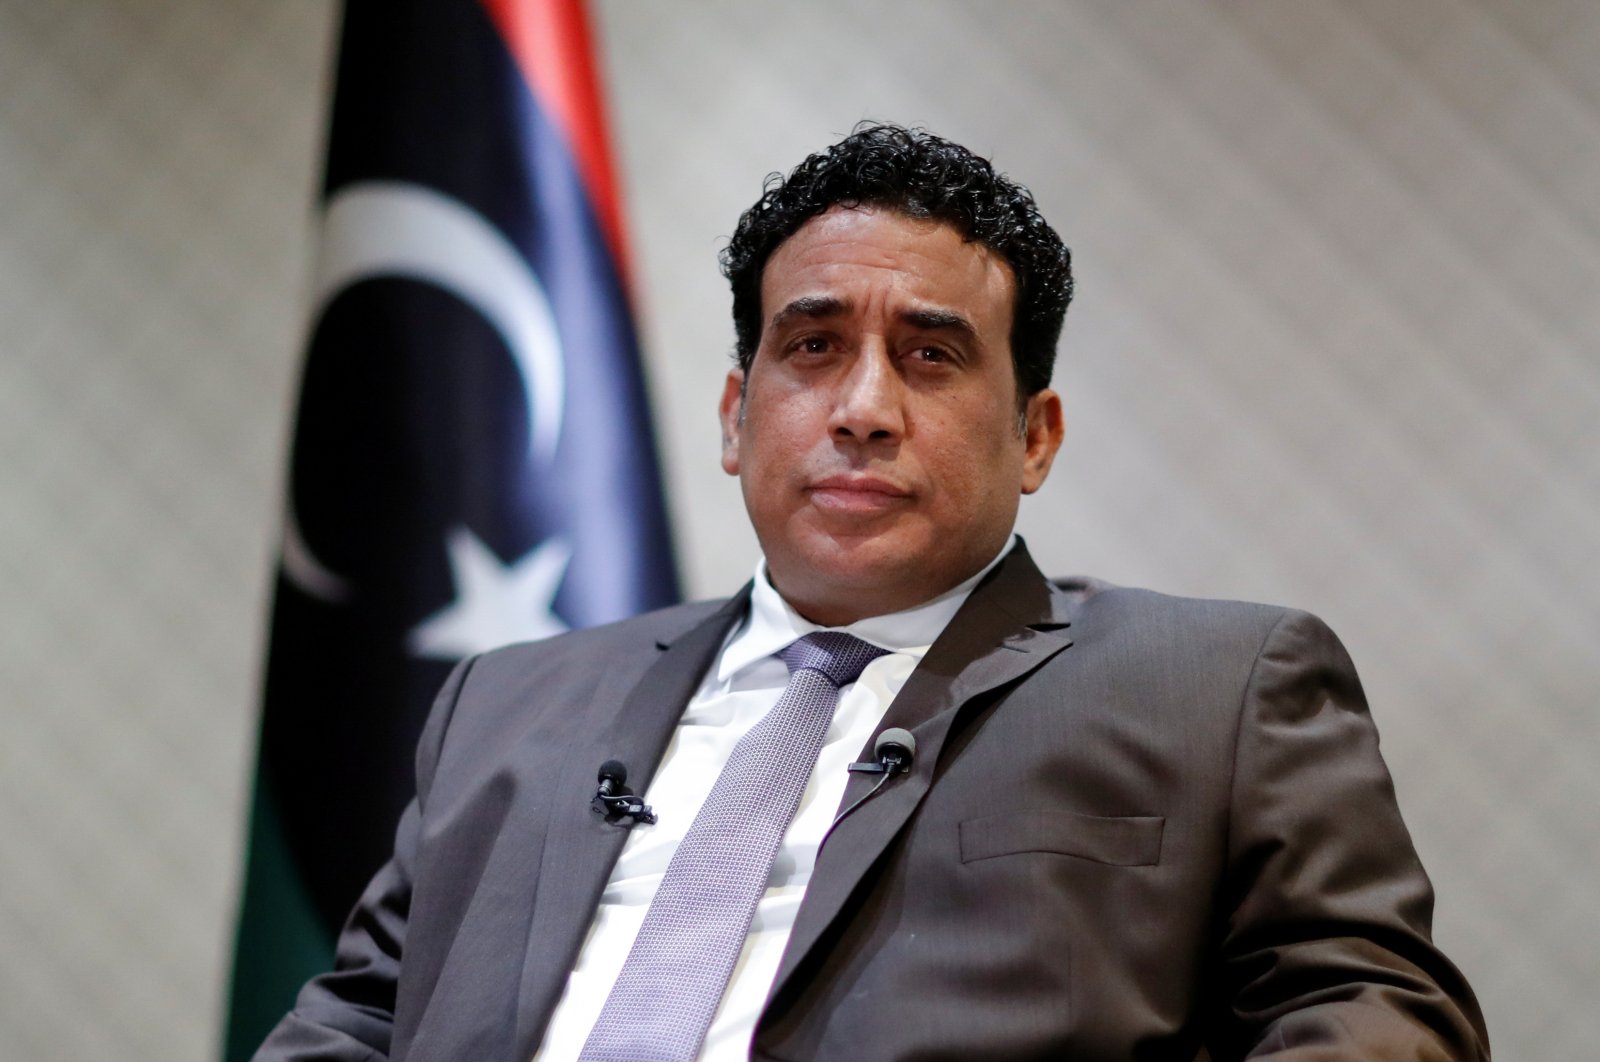 Head of the Libyan Presidential Council Mohammad Younes Menfi attends an interview with Reuters in Paris, France, Nov. 13, 2021. (Reuters File Photo)